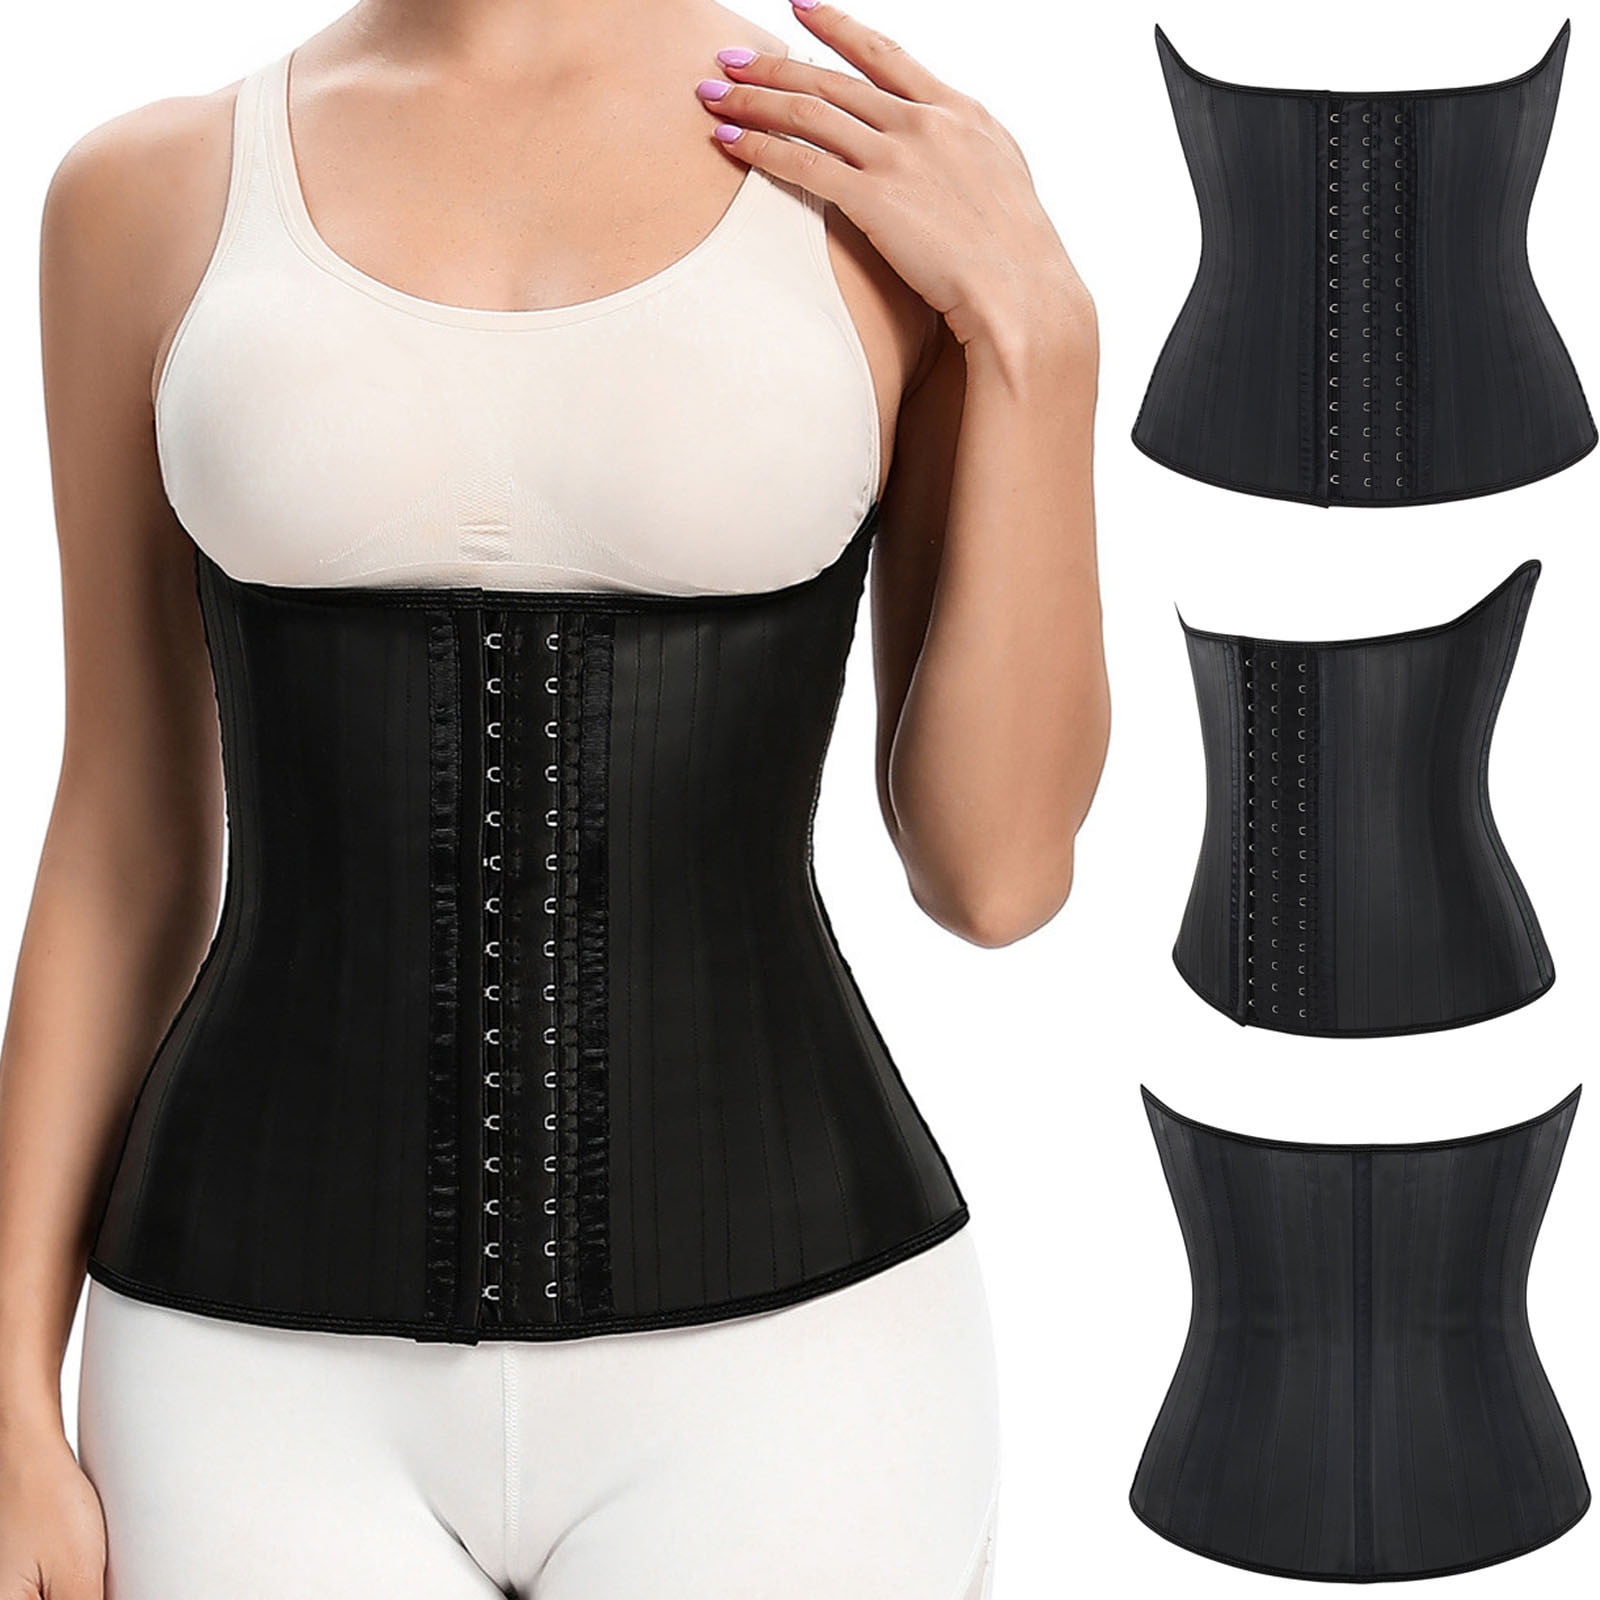 AXXD Clearance Shapewear For Women,Court Corset Gothic Retro Girdle With  Straps Chest Support Bodysuit for Men Shapewear Black S 